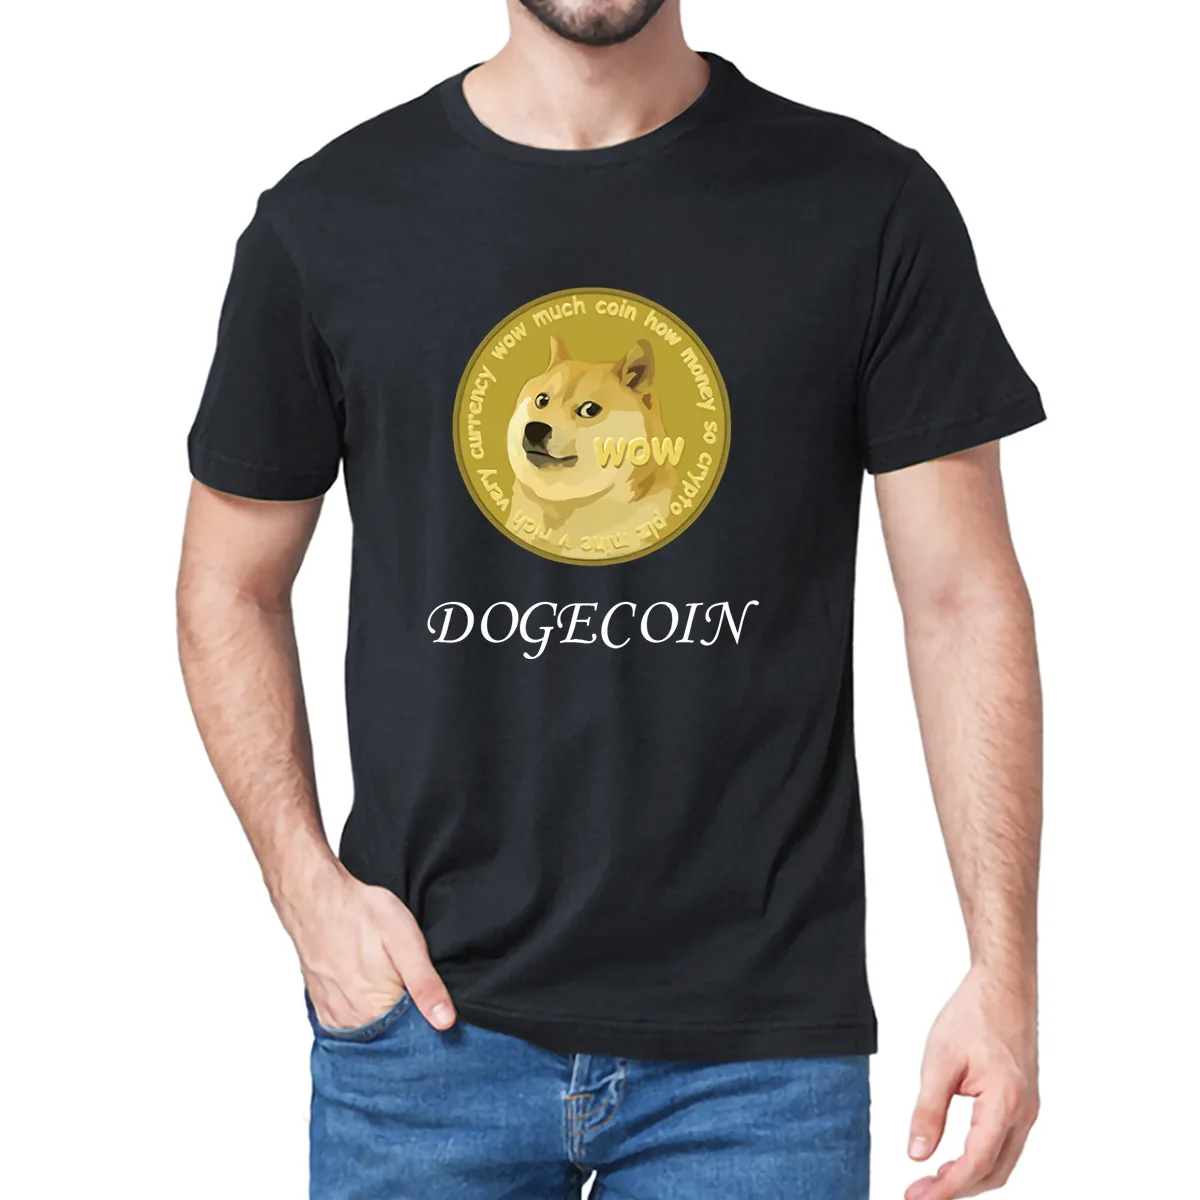 

Dogecoin Doge HODL To the Moon Crypto Meme Gold COINS Funny Summe Men's 100% Cotton Novelty T-Shirt Unisex Women Soft Top Tee